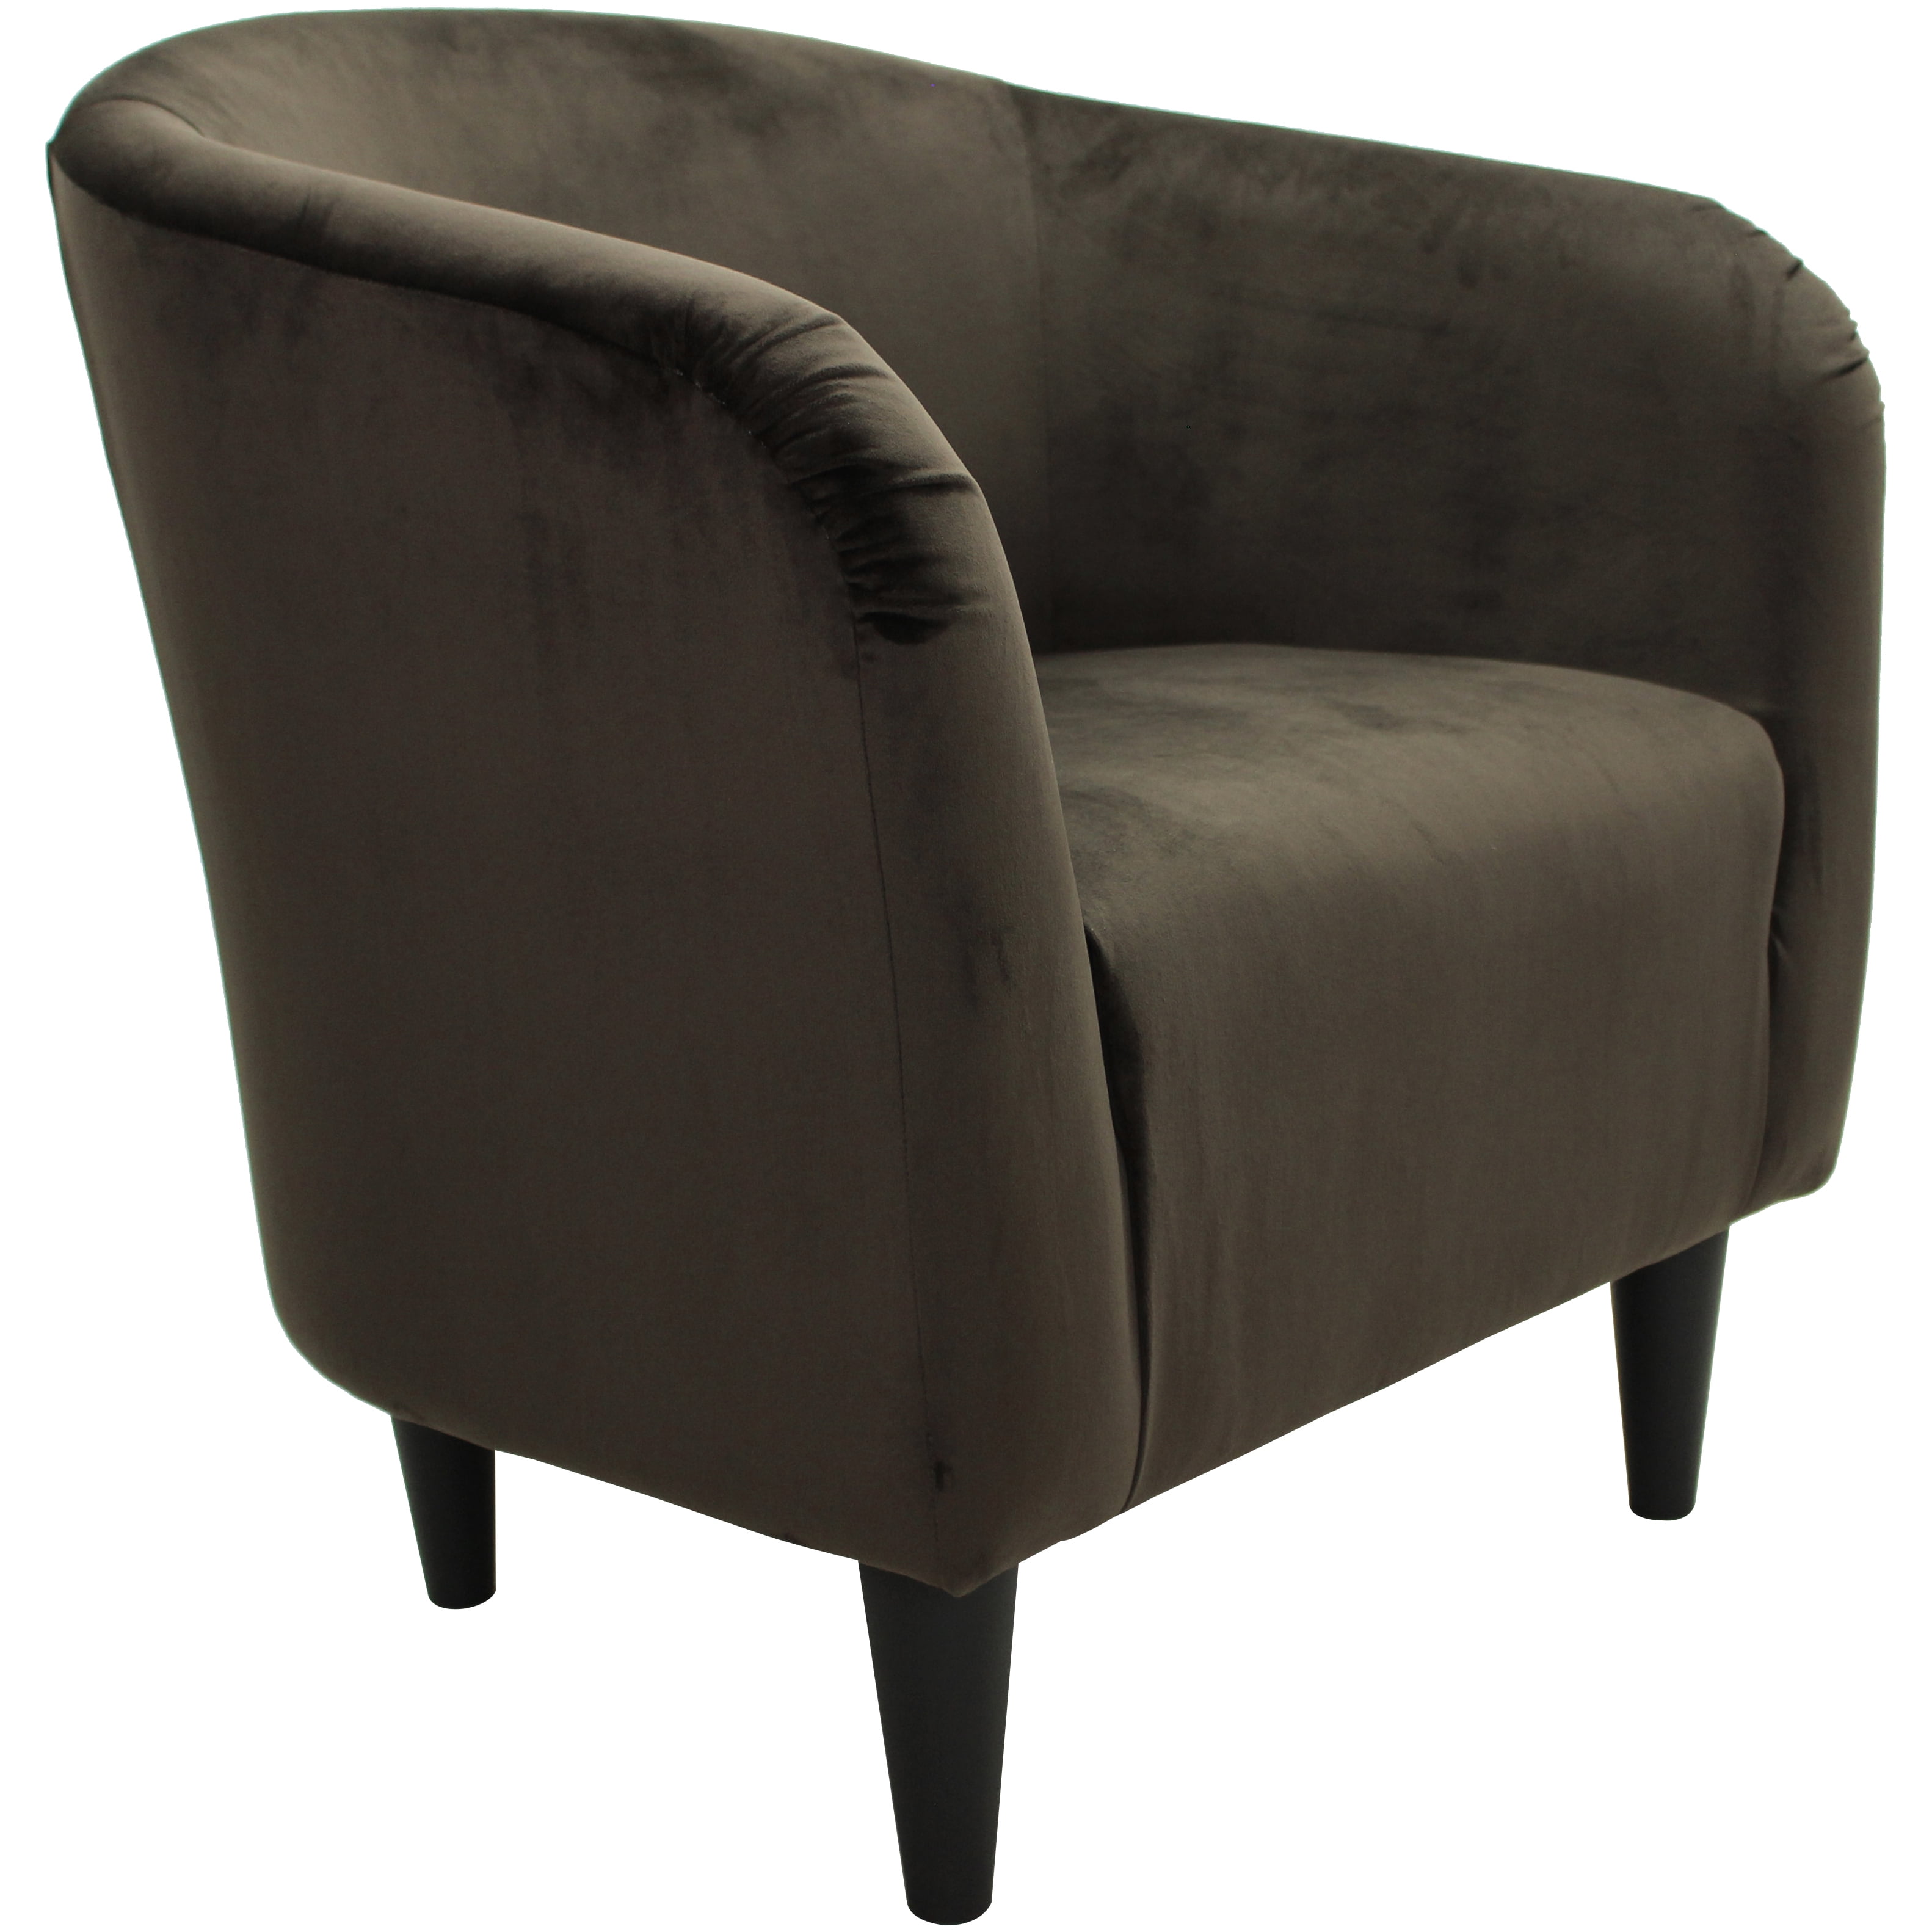 Mainstays Microfiber Tub Accent Chair, Chocolate Brown - 1